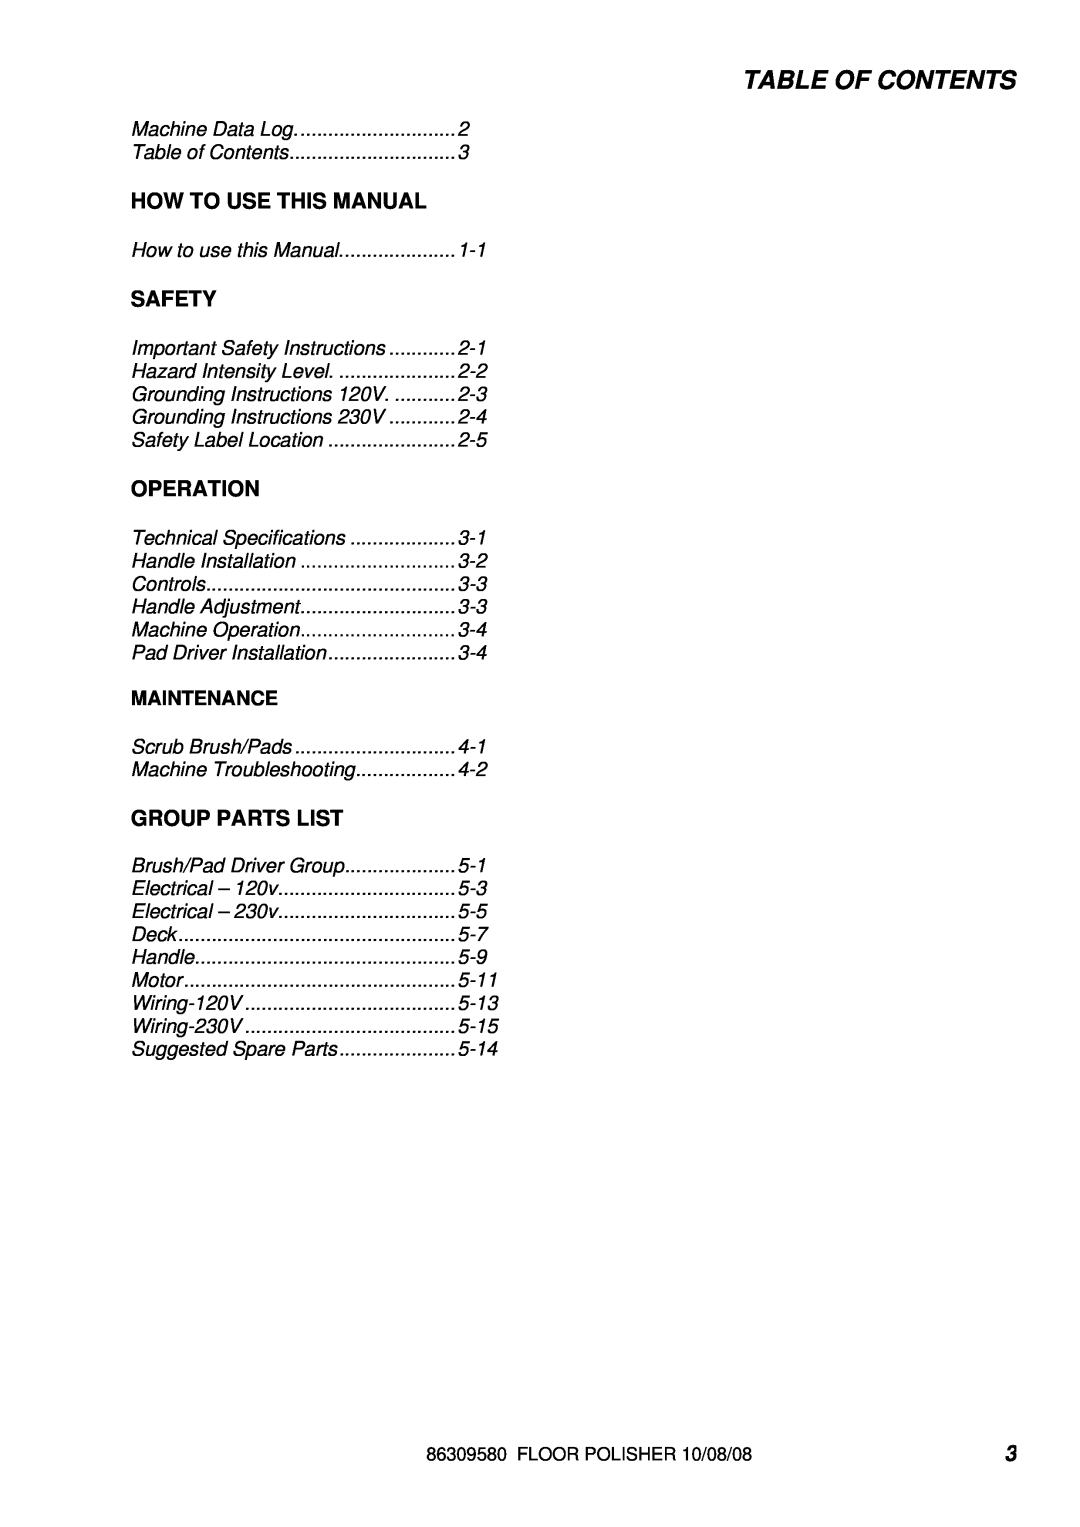 Windsor SP15-10090230 manual Table Of Contents, How To Use This Manual, Safety, Operation, Group Parts List, Maintenance 